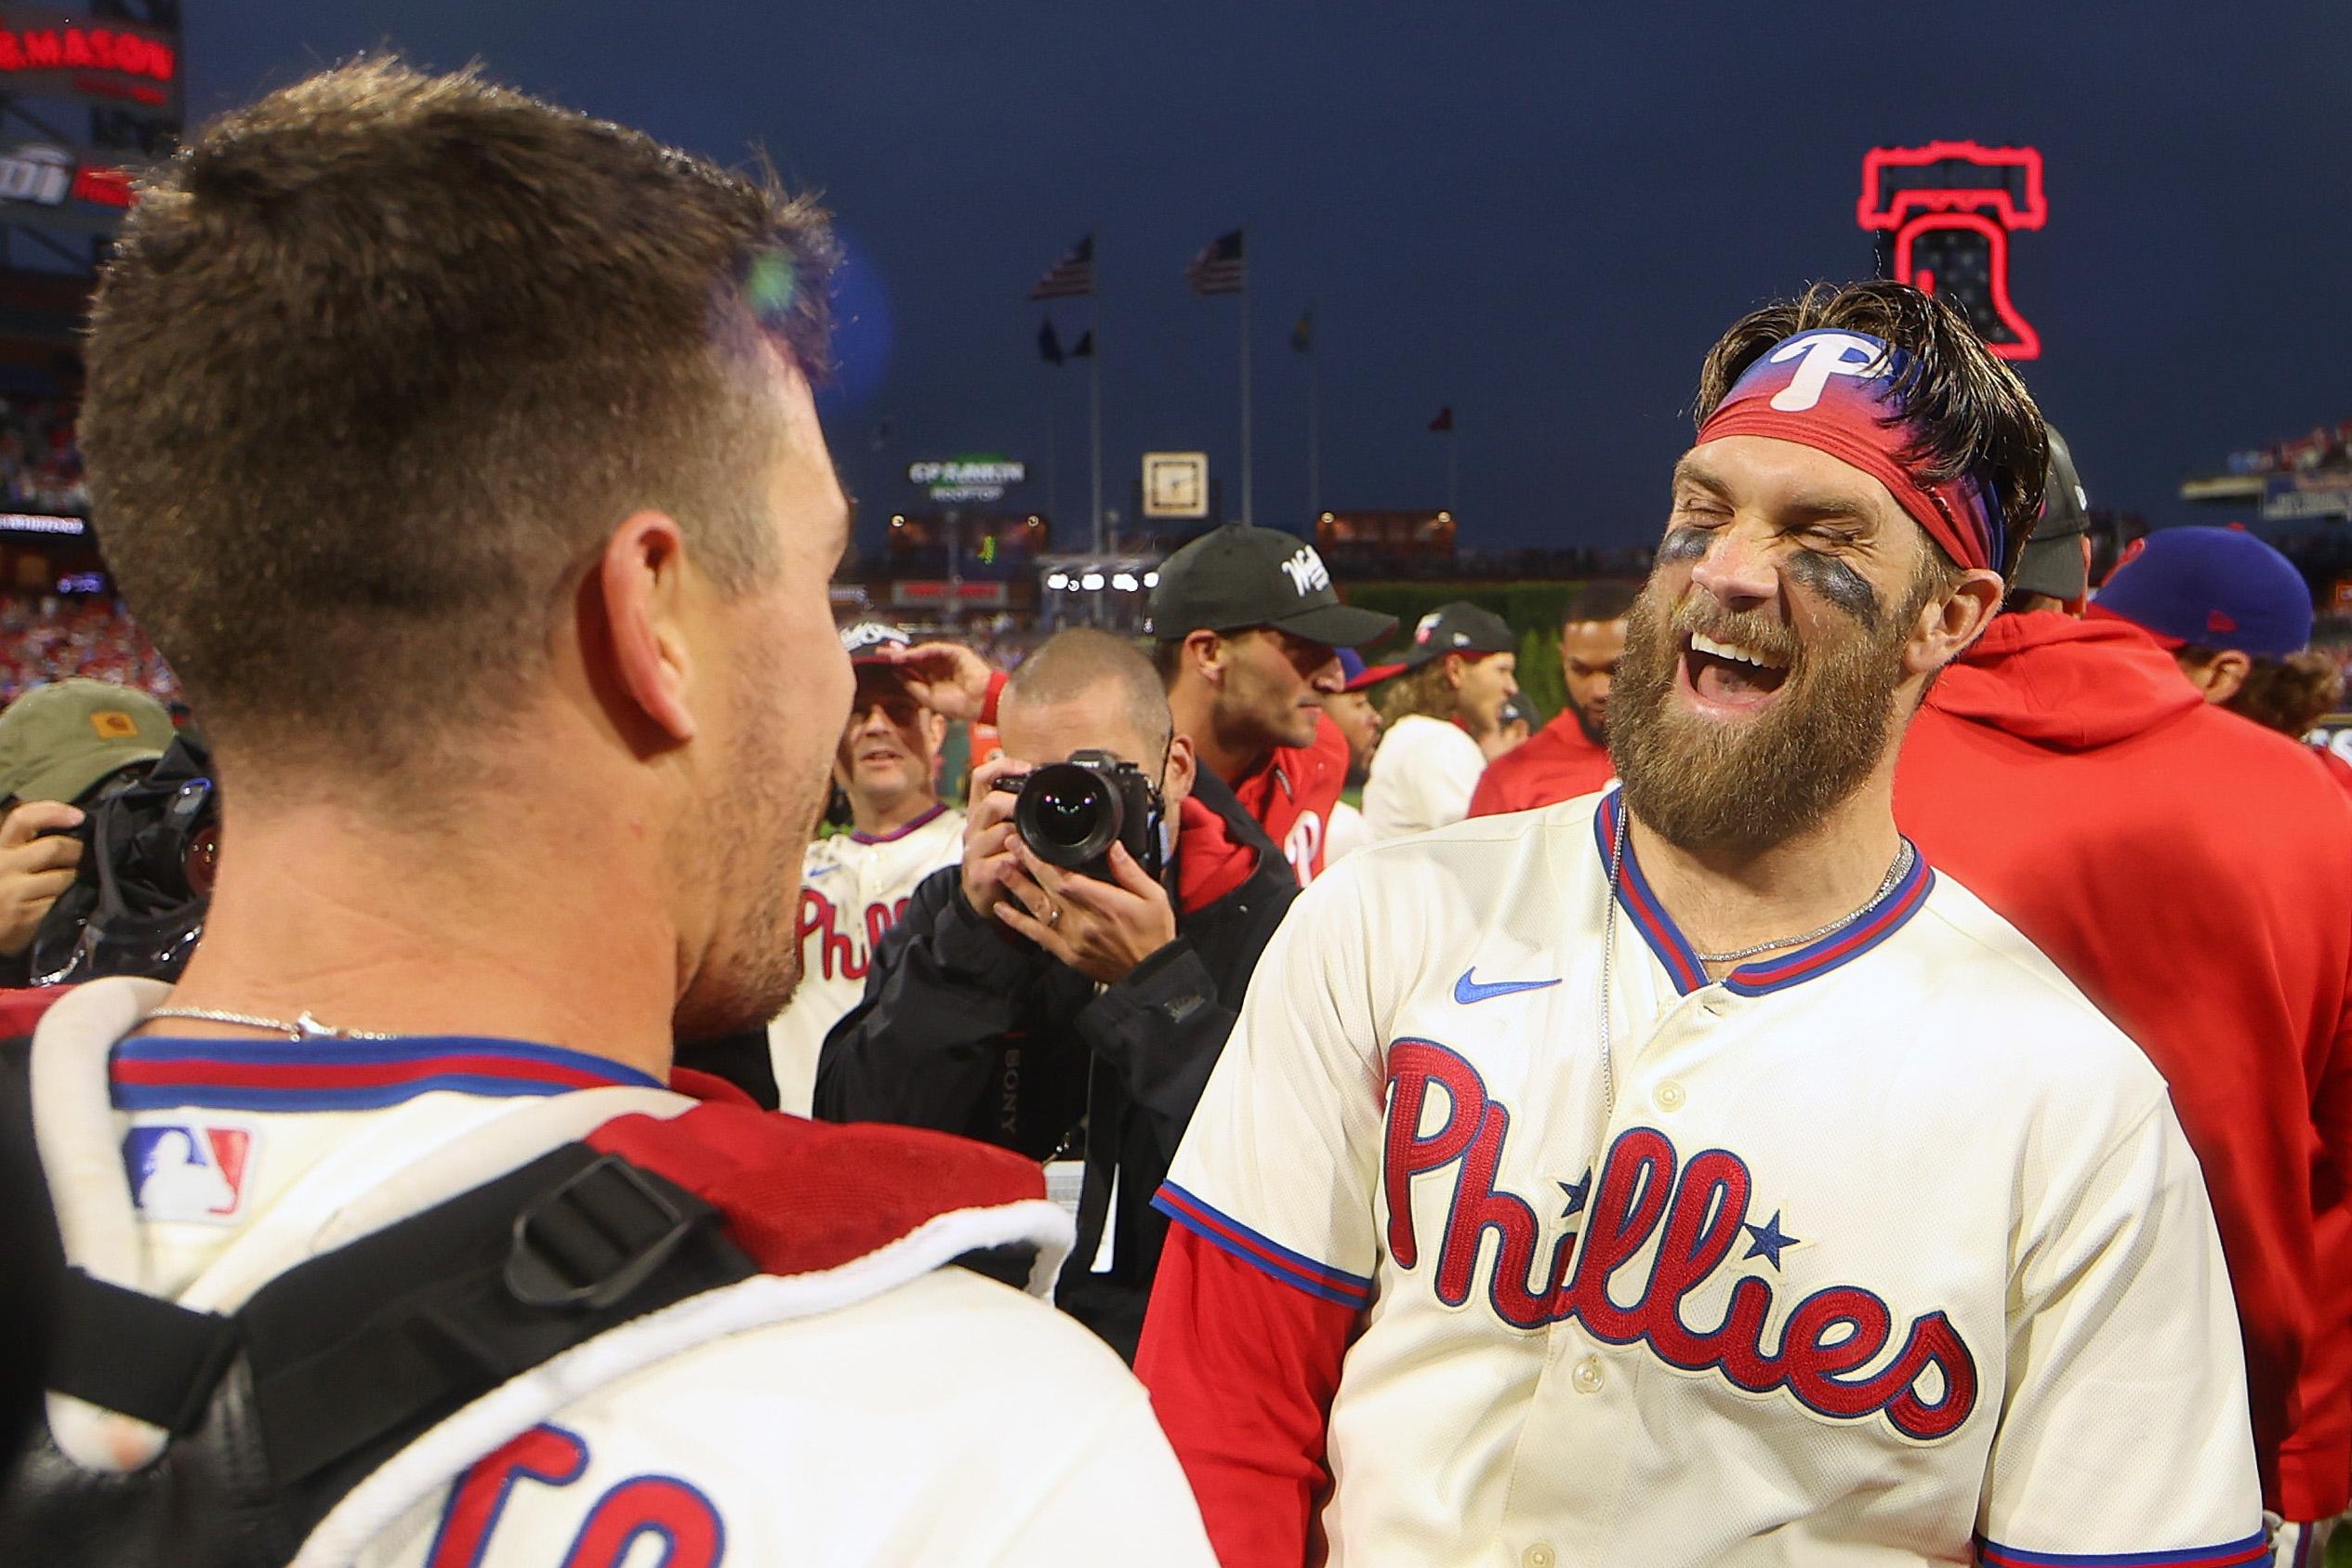 Harper laughs with Realmulto, whose back is turned, as the Phillies crowd around them on the field